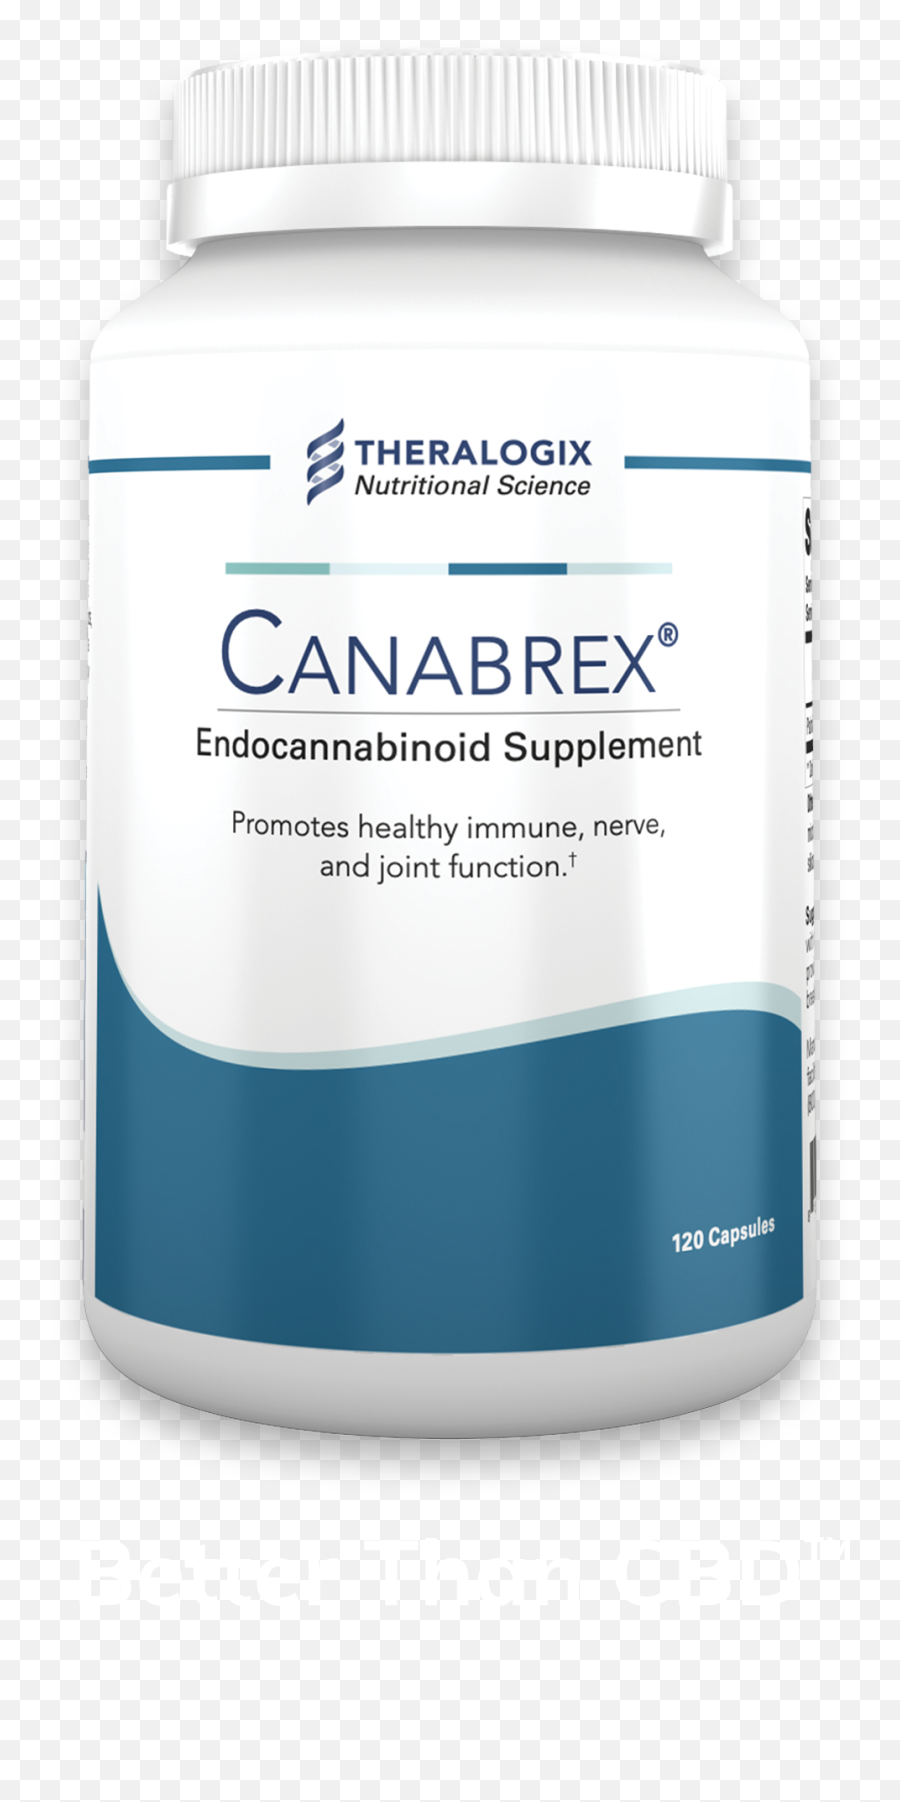 Canabrex Endocannabinoid For Mental Health 60 Day Supply Emoji,Peanuts Emotions Pictures